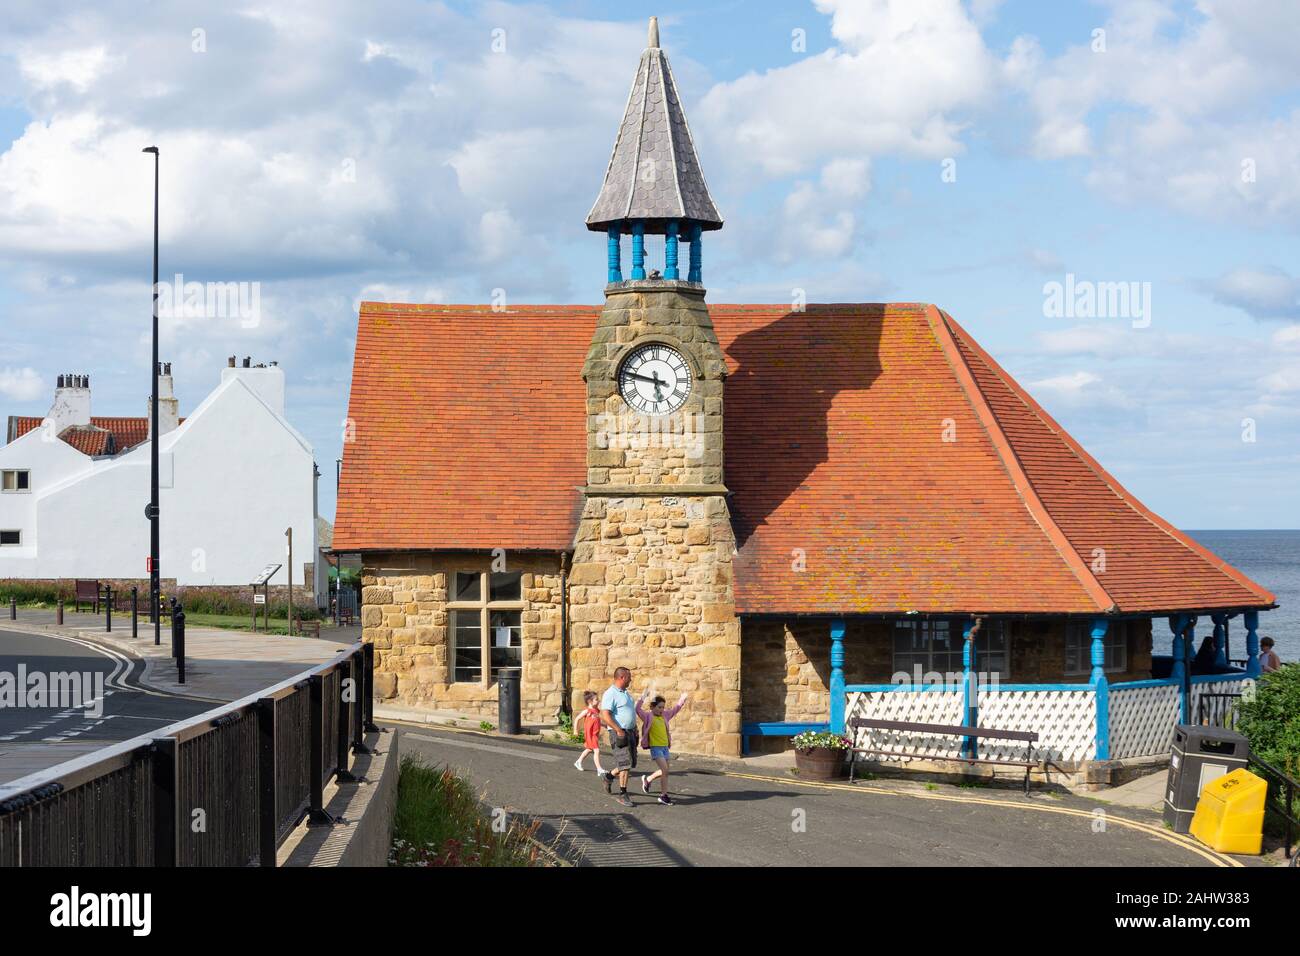 Old Cullercoats Watch House, Victoria Crescent, Cullercoats, Tyne and Wear, England, United Kingdom Stock Photo